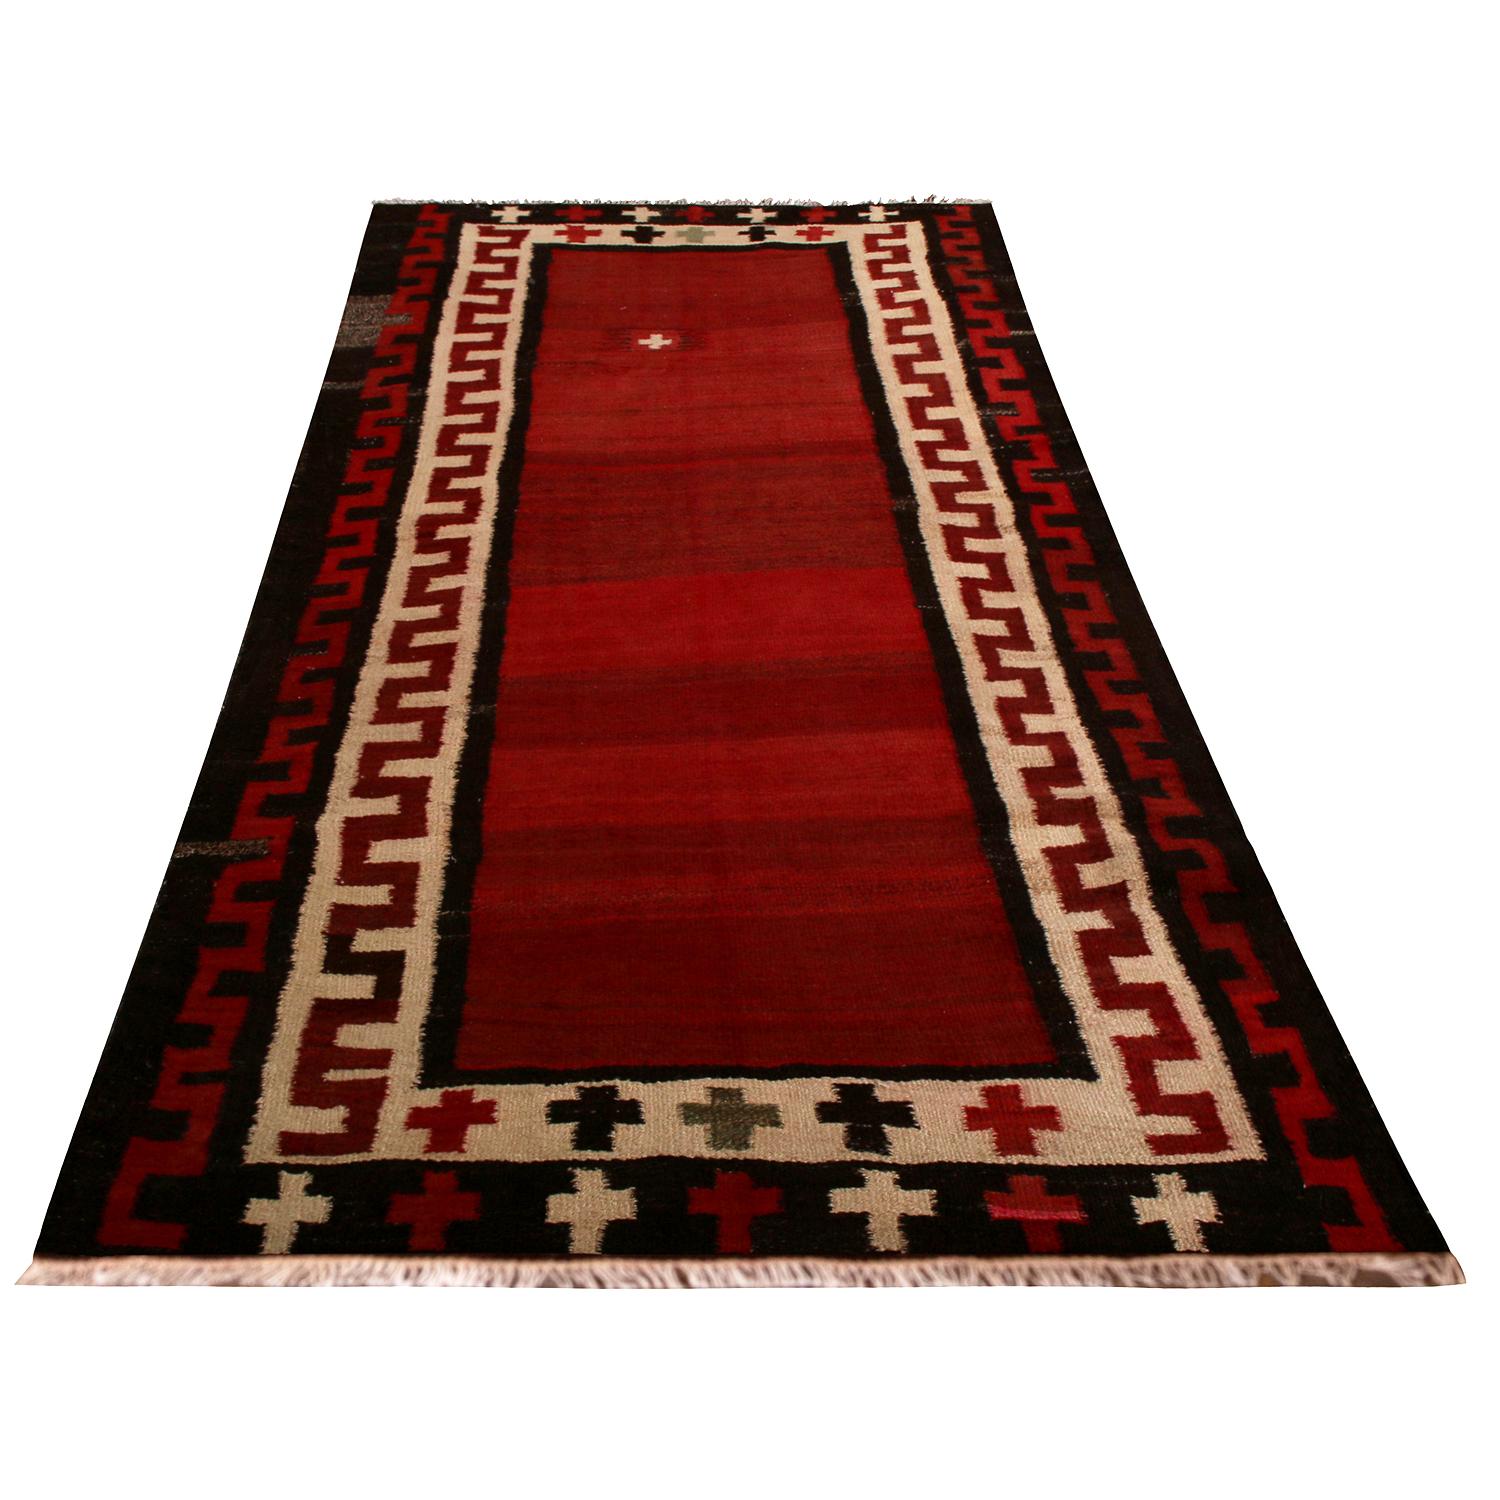 Handwoven in wool originating from Persia between 1950-1960, this vintage midcentury Persian Kilim is a Bidjar (Bijar) rug, named for the titular region celebrated for the quality material, craftsmanship, and durability pieces like this item enjoy.